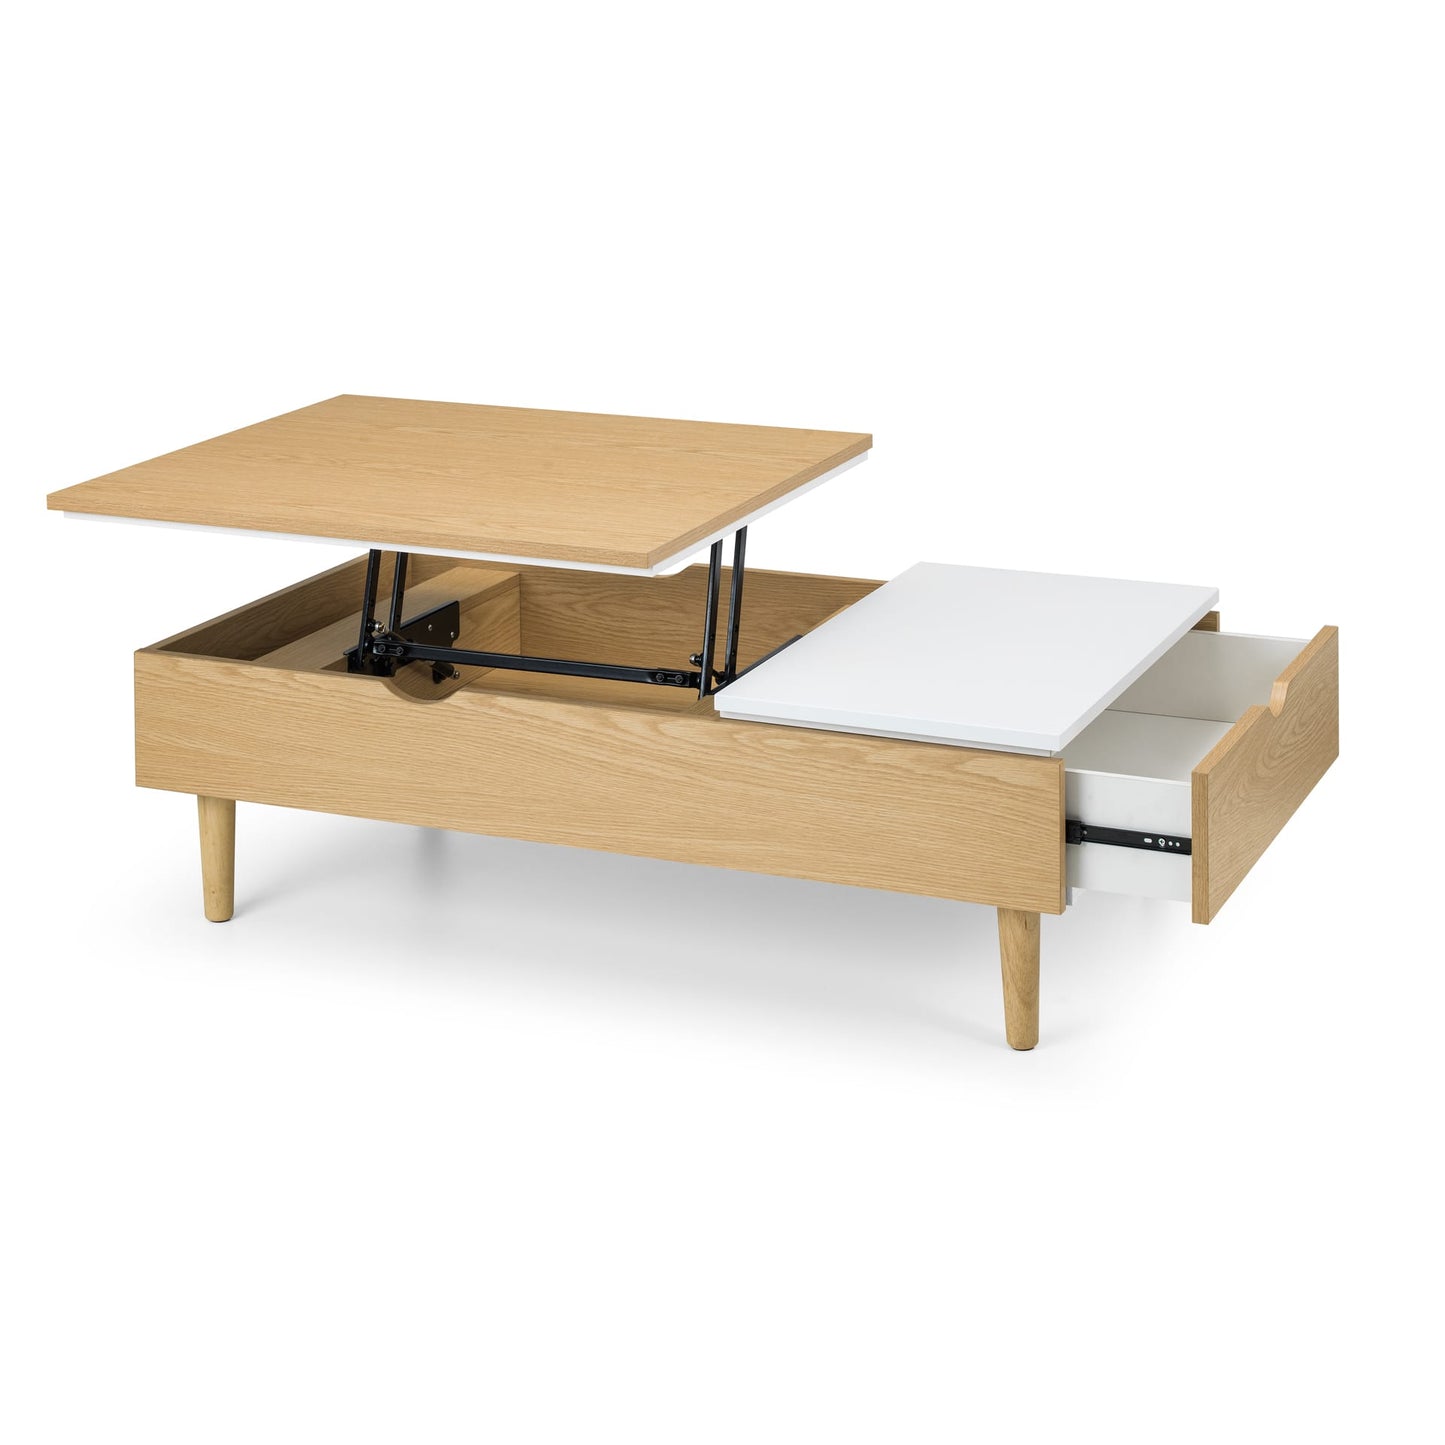 Latimer Lift-Up Coffee Table